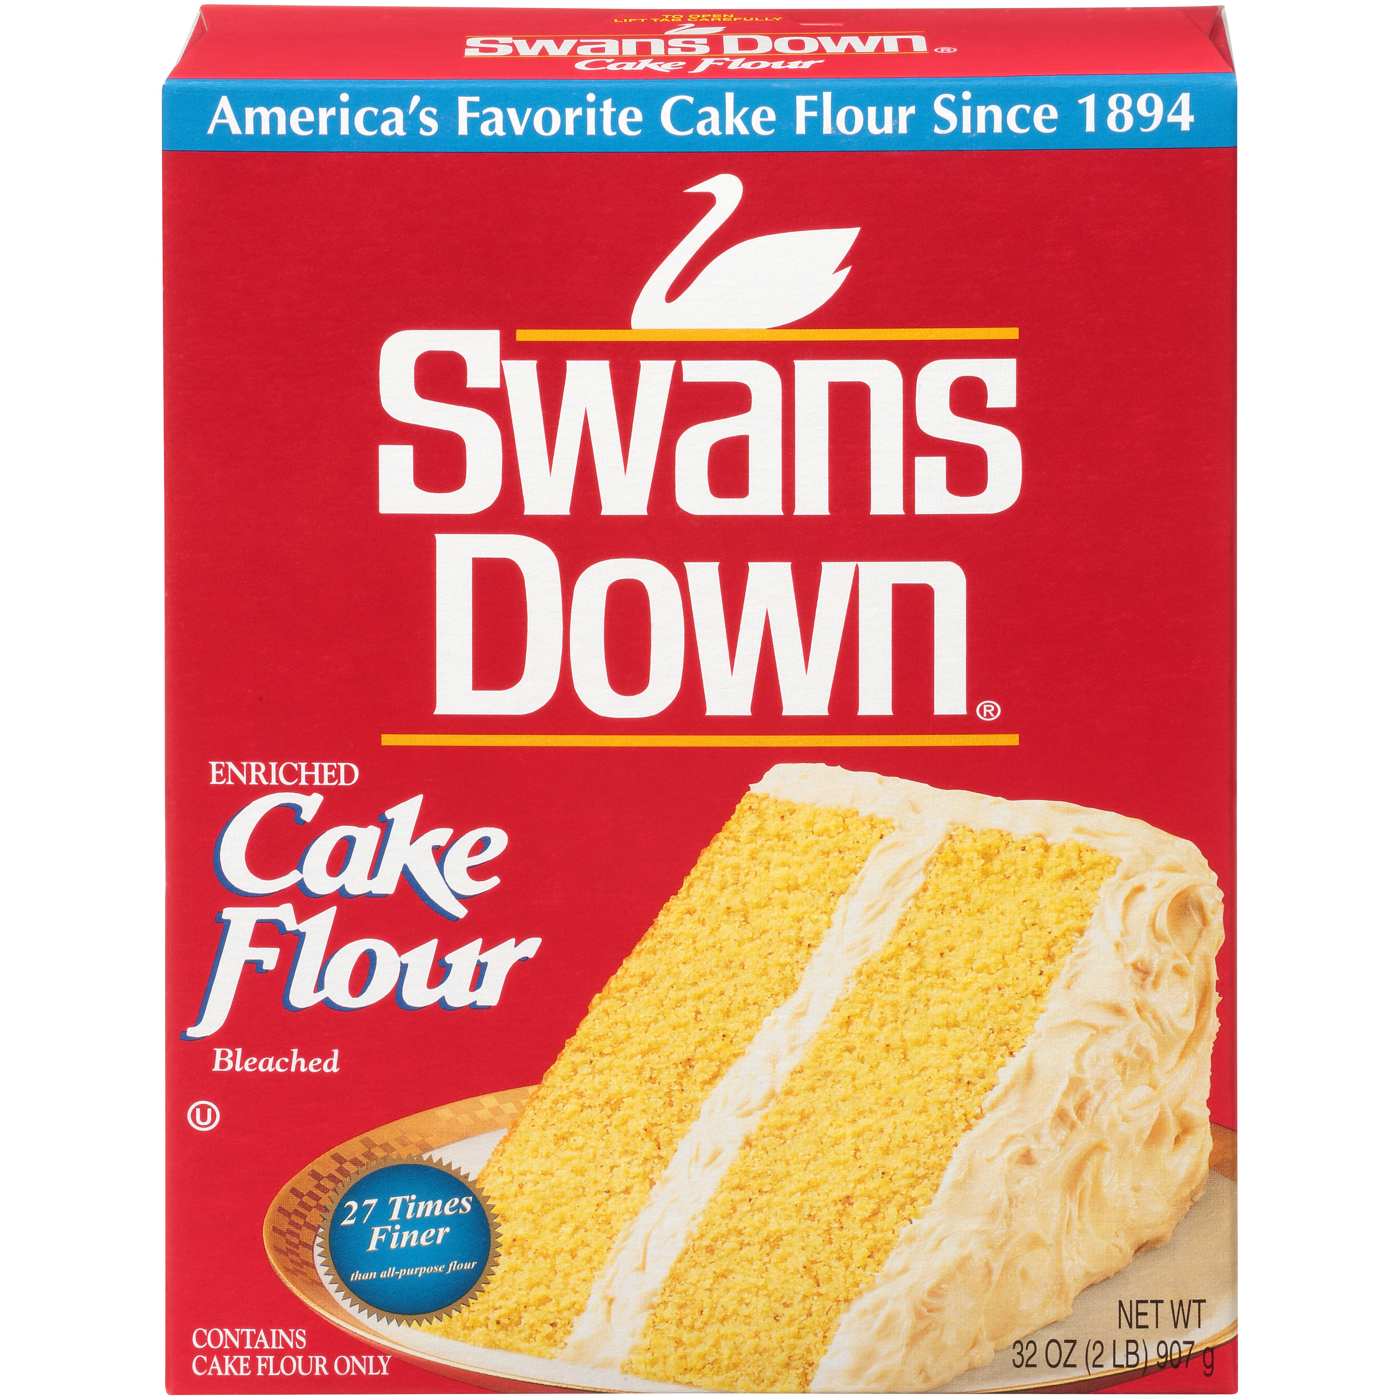 Swans Down Cake Flour; image 1 of 4